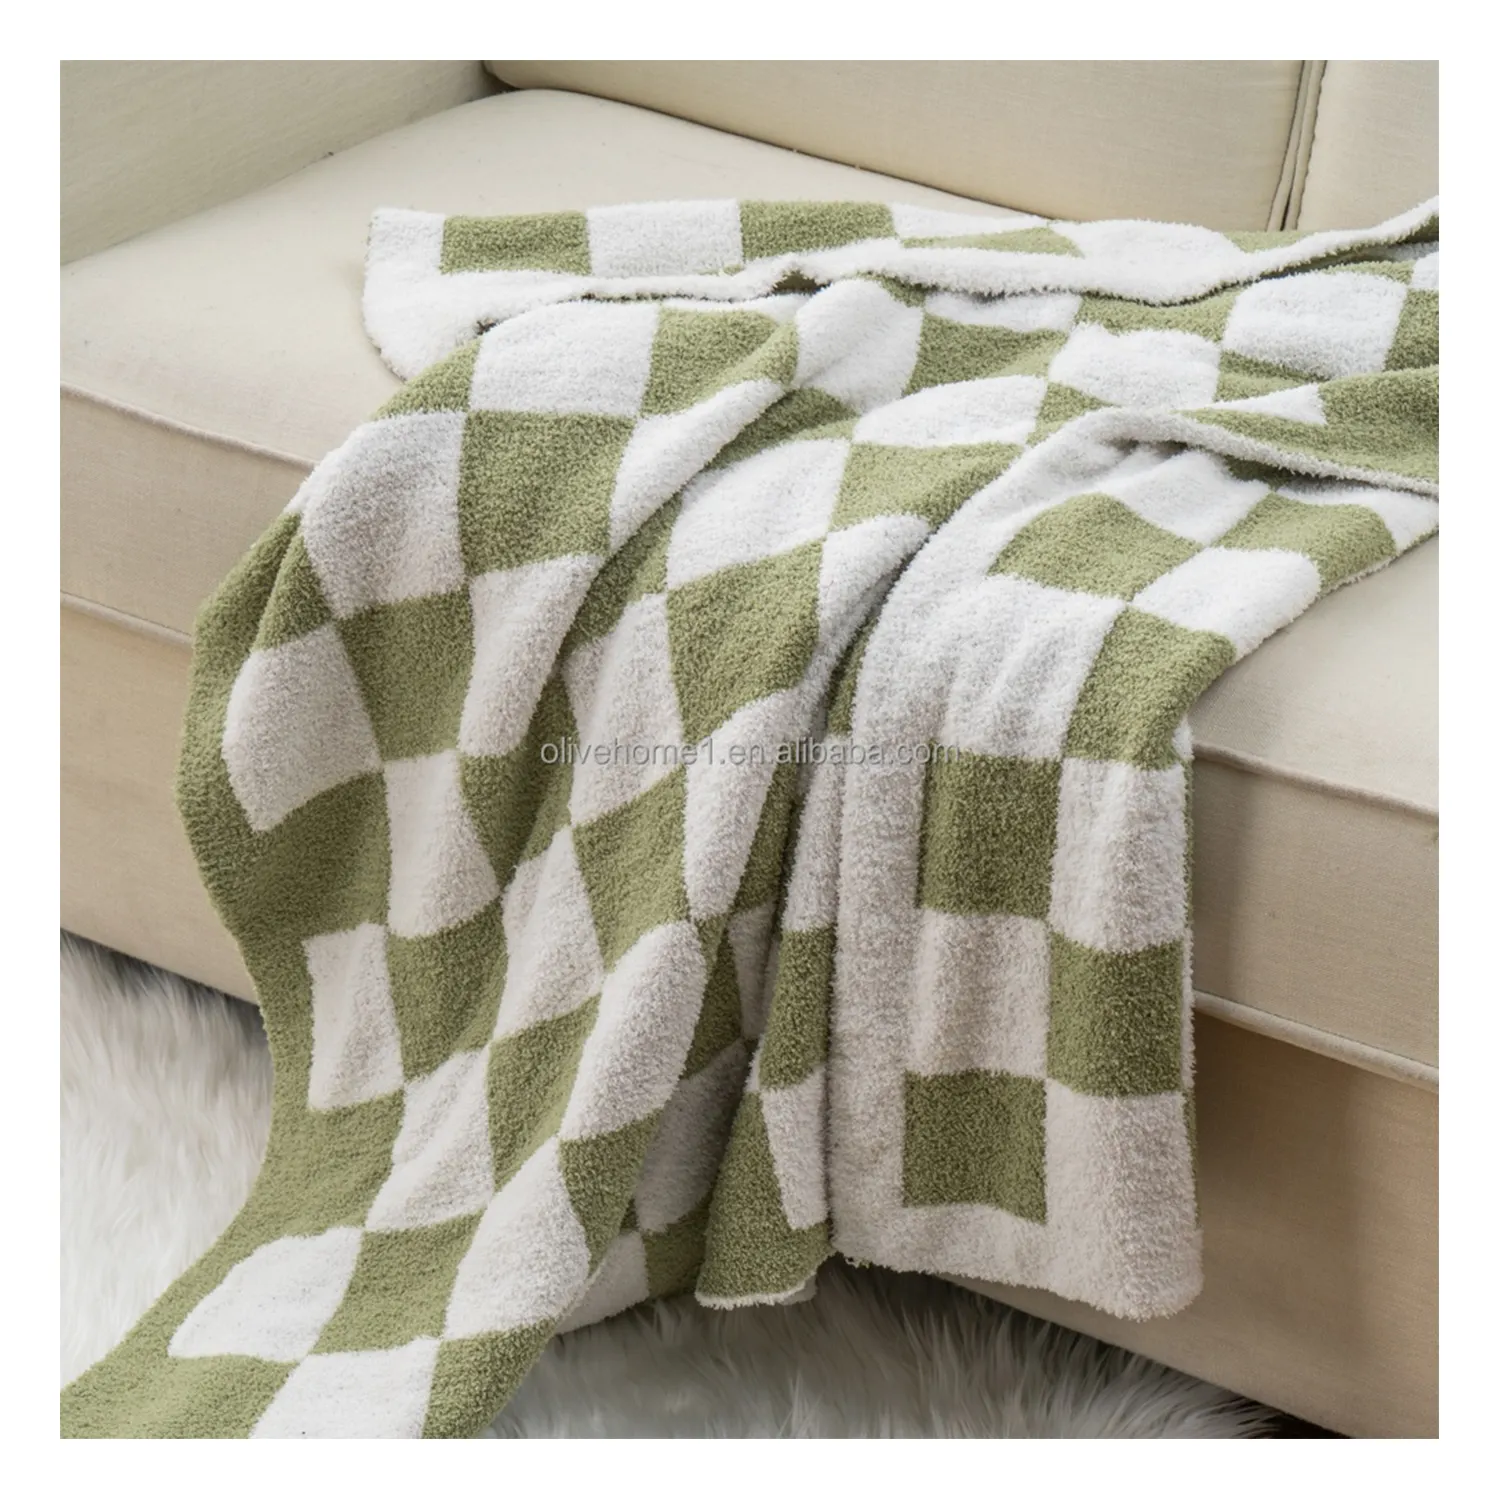 Heavyweight Sage Green Bed Blanket Reversible Knitted Checkered Microfiber feather yarn Checkerboard Throw Blankets for Couch